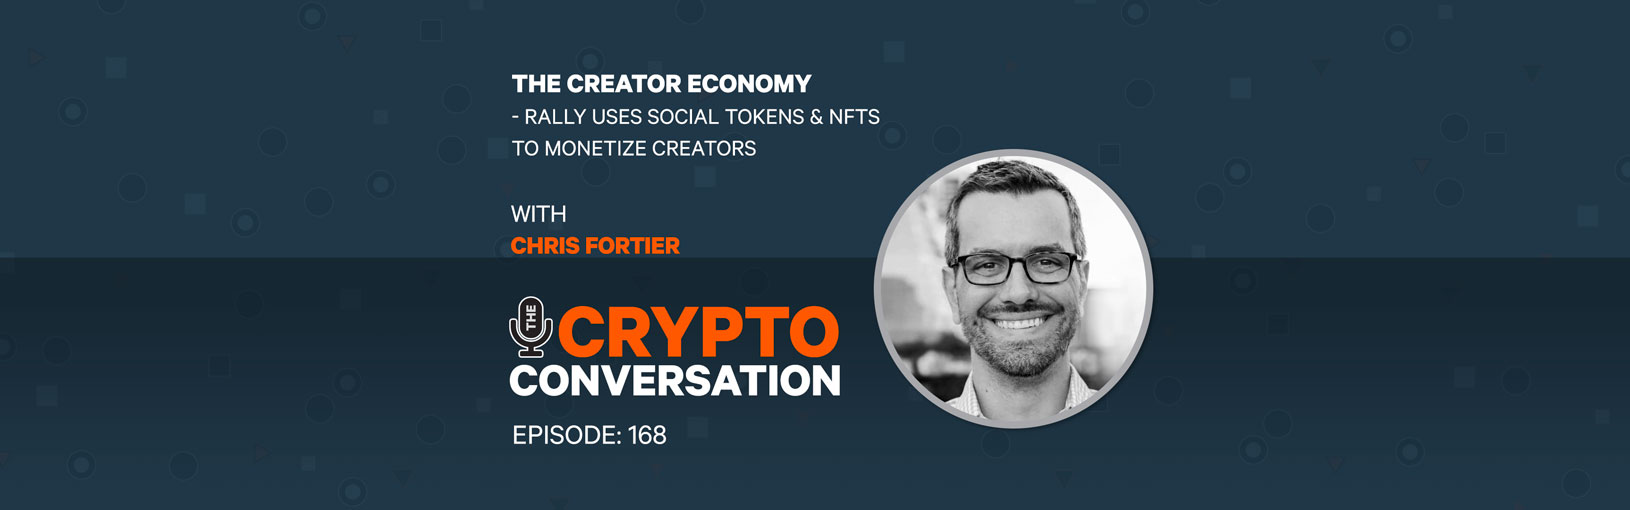 The Creator Economy – Rally uses Social Tokens & NFTs to monetize Creators